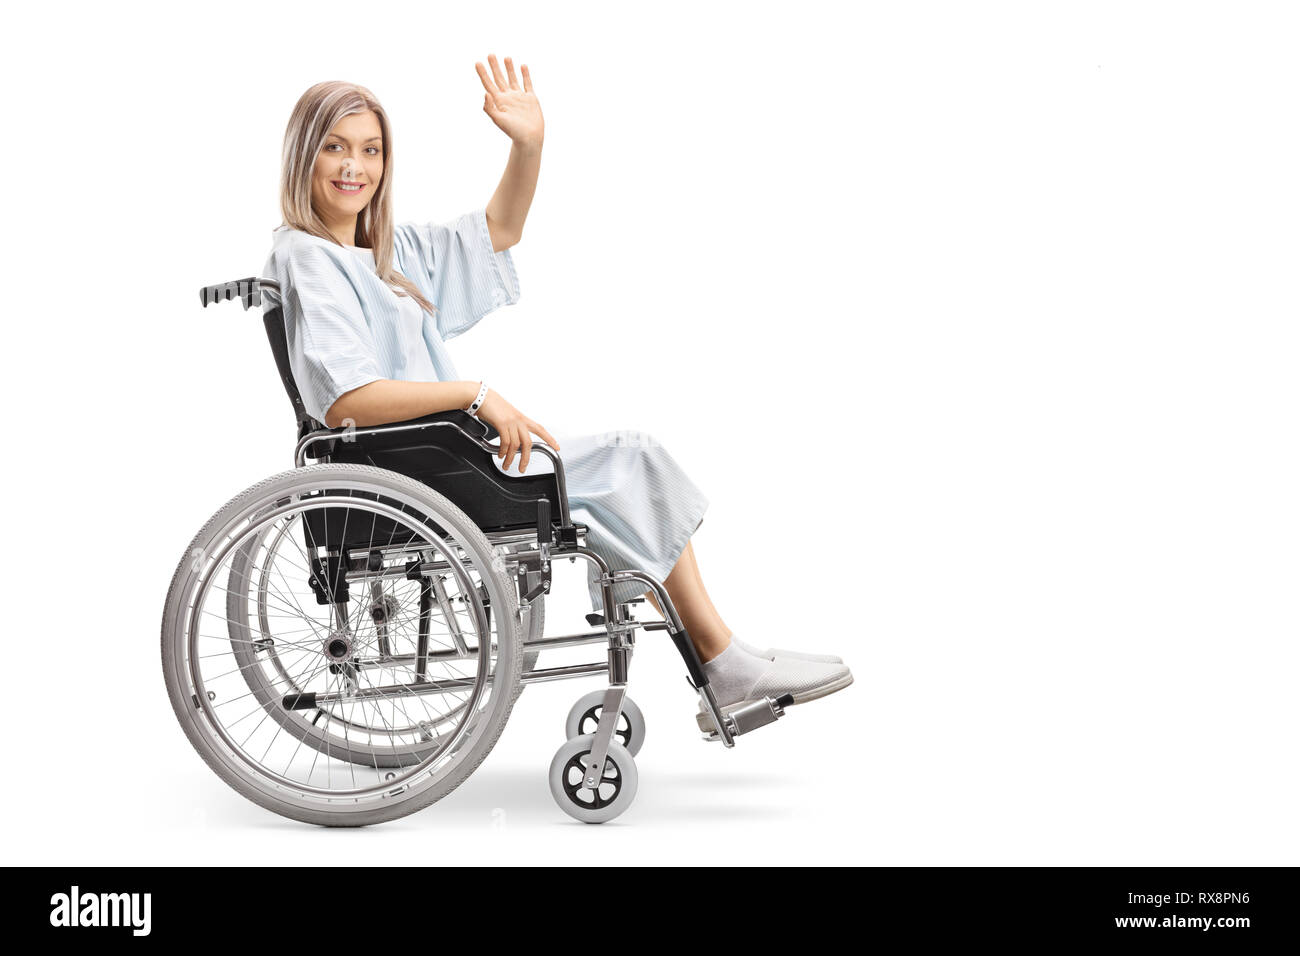 Smiling female patient in a wheelchair waving at the camera isolated on white background Stock Photo